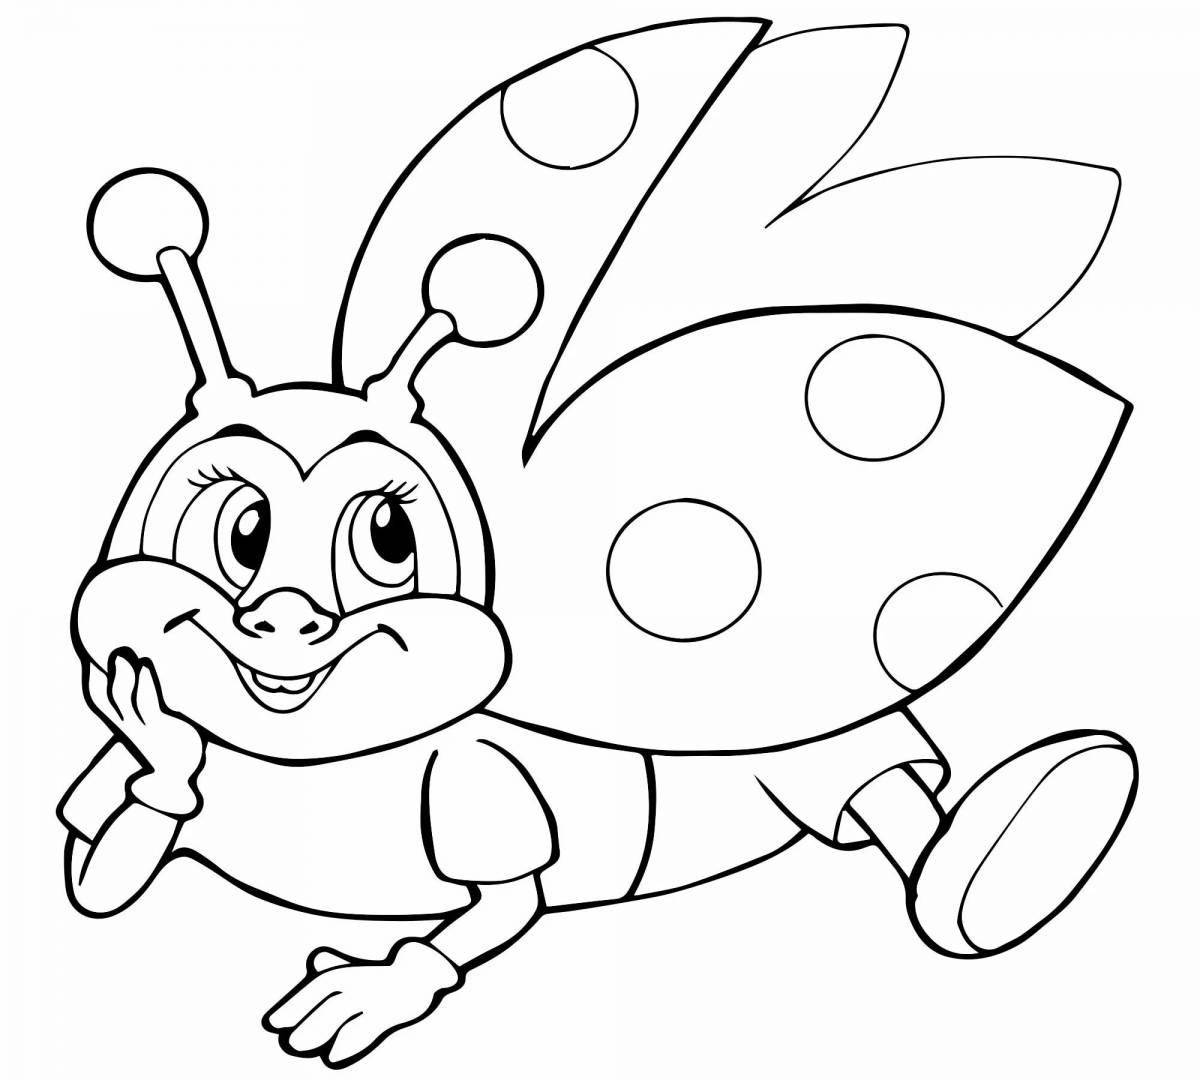 Colorful ladybug coloring for preschoolers